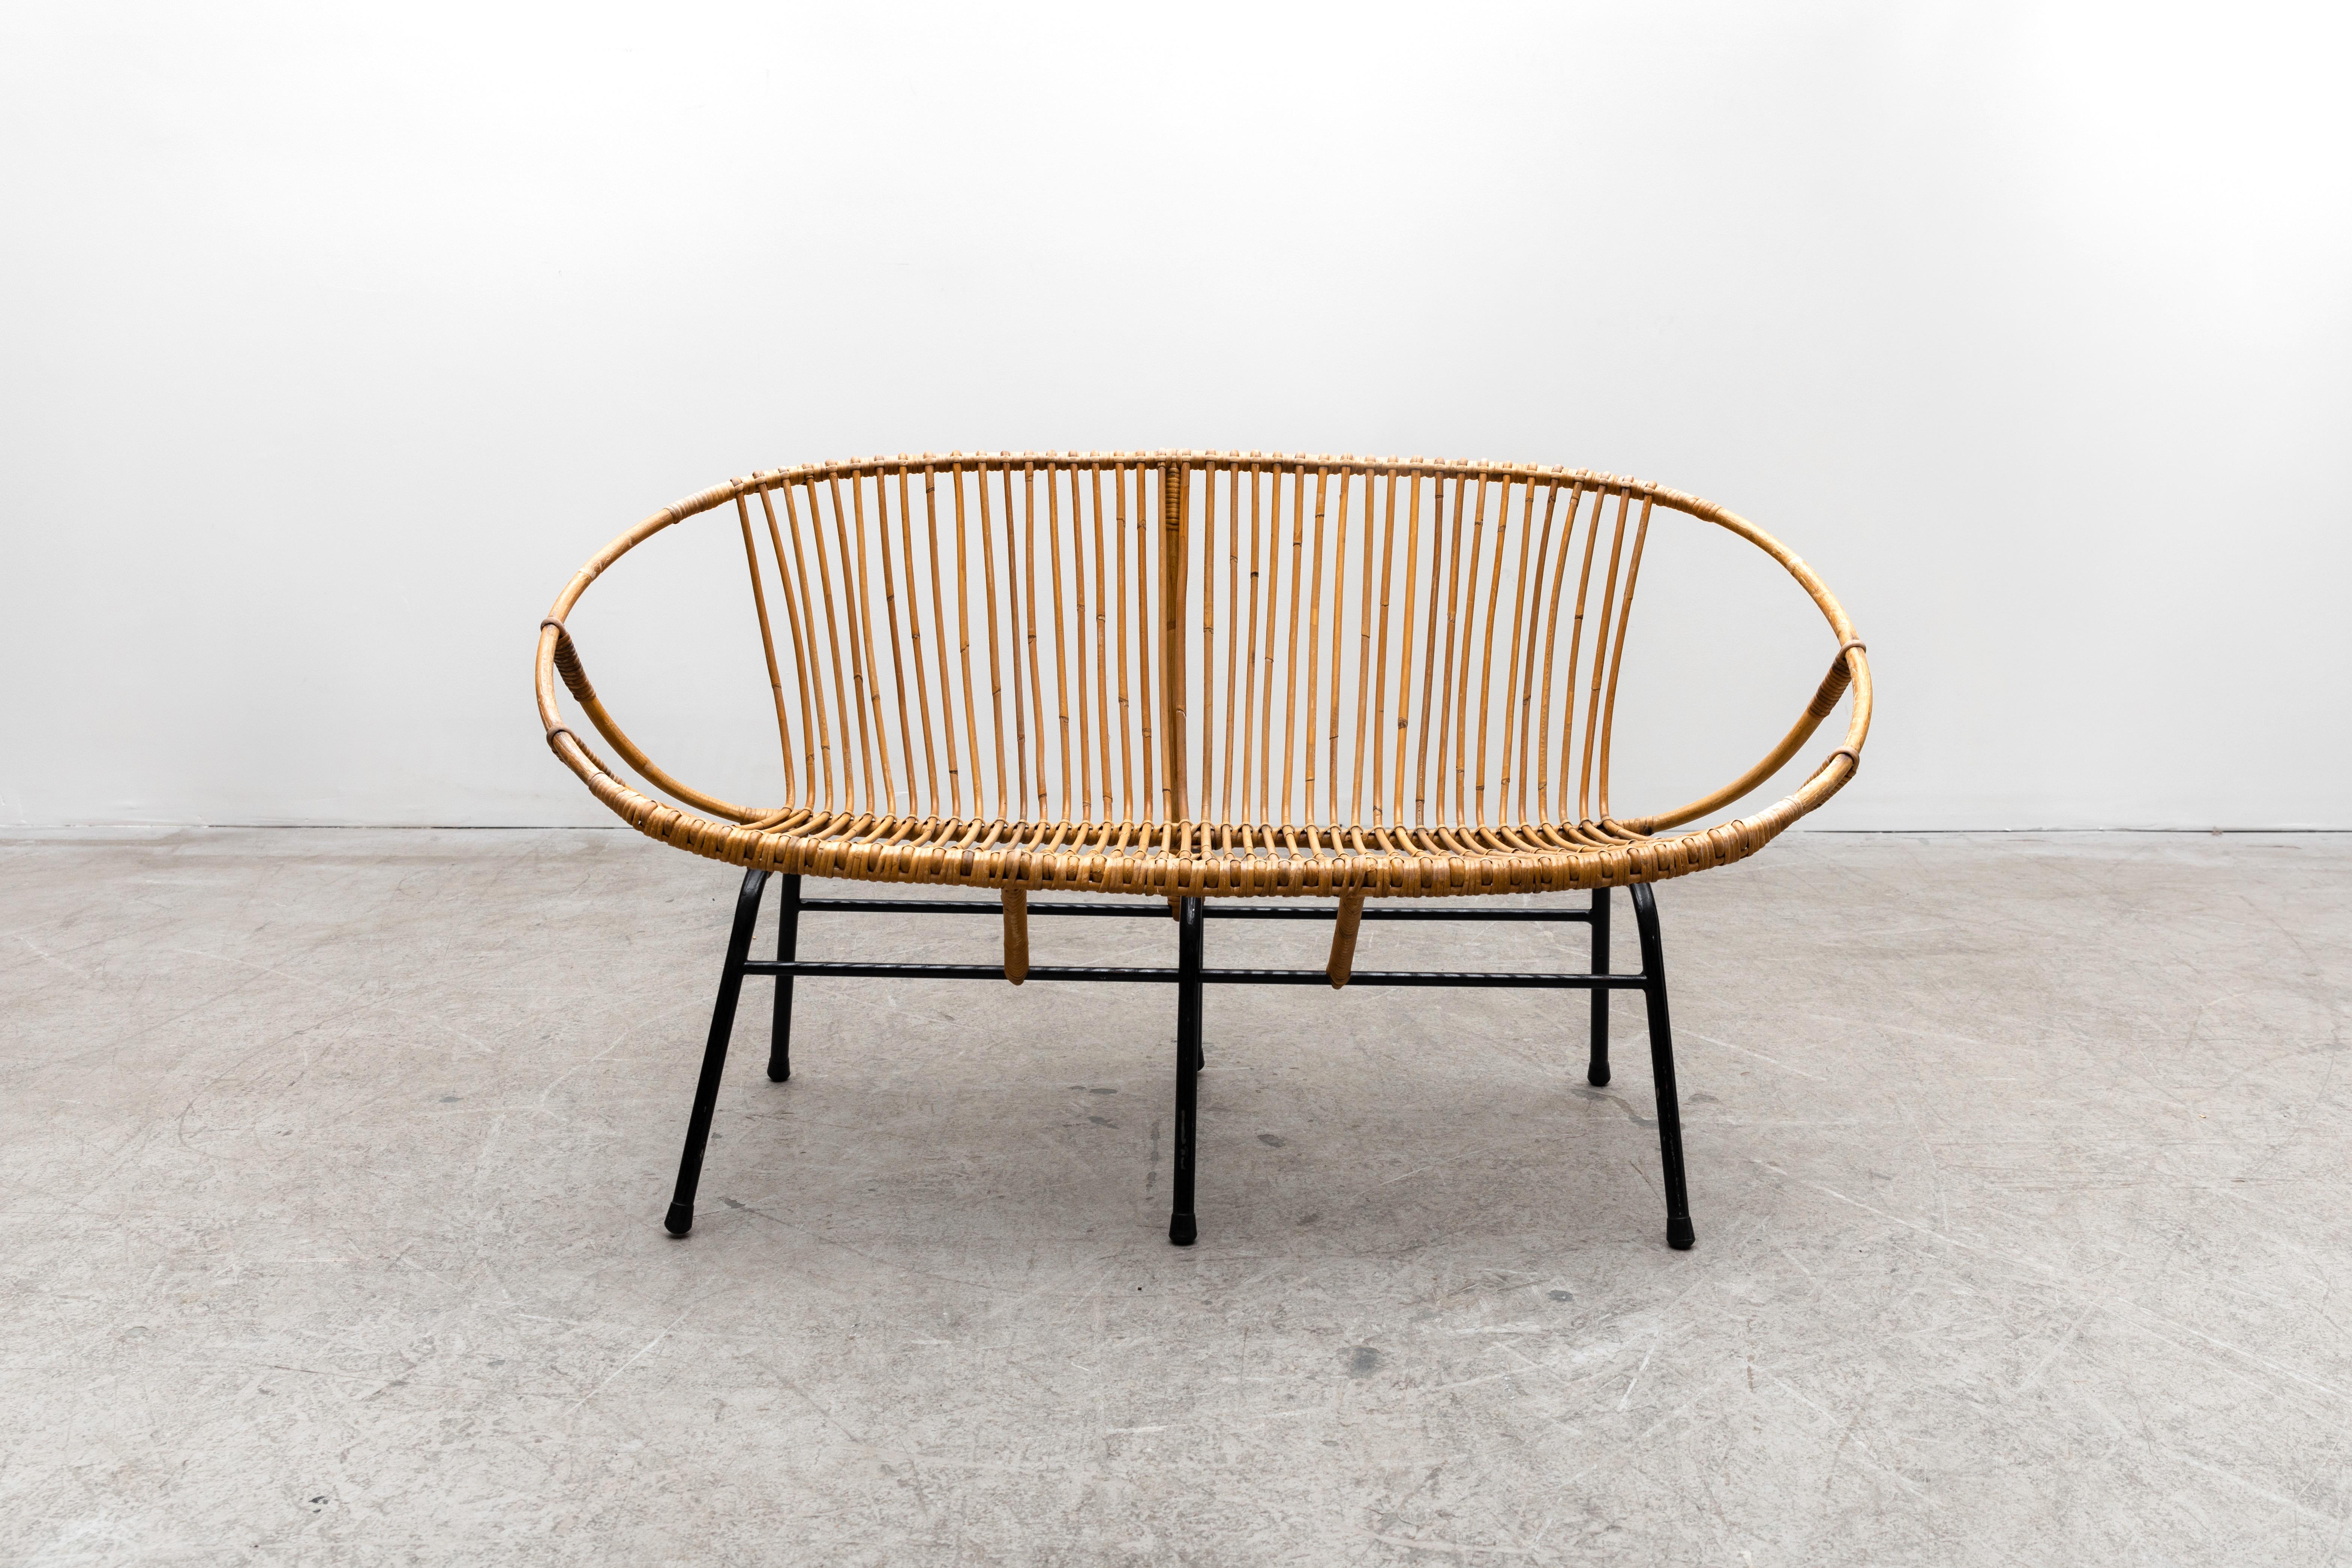 Rohé Noordwolde bamboo loveseat with black enameled tubular base. In original condition with visible patina. Minimal rattan loss and breakage. Frame shows wear and scratching. Wear is consistent with it's age and use.